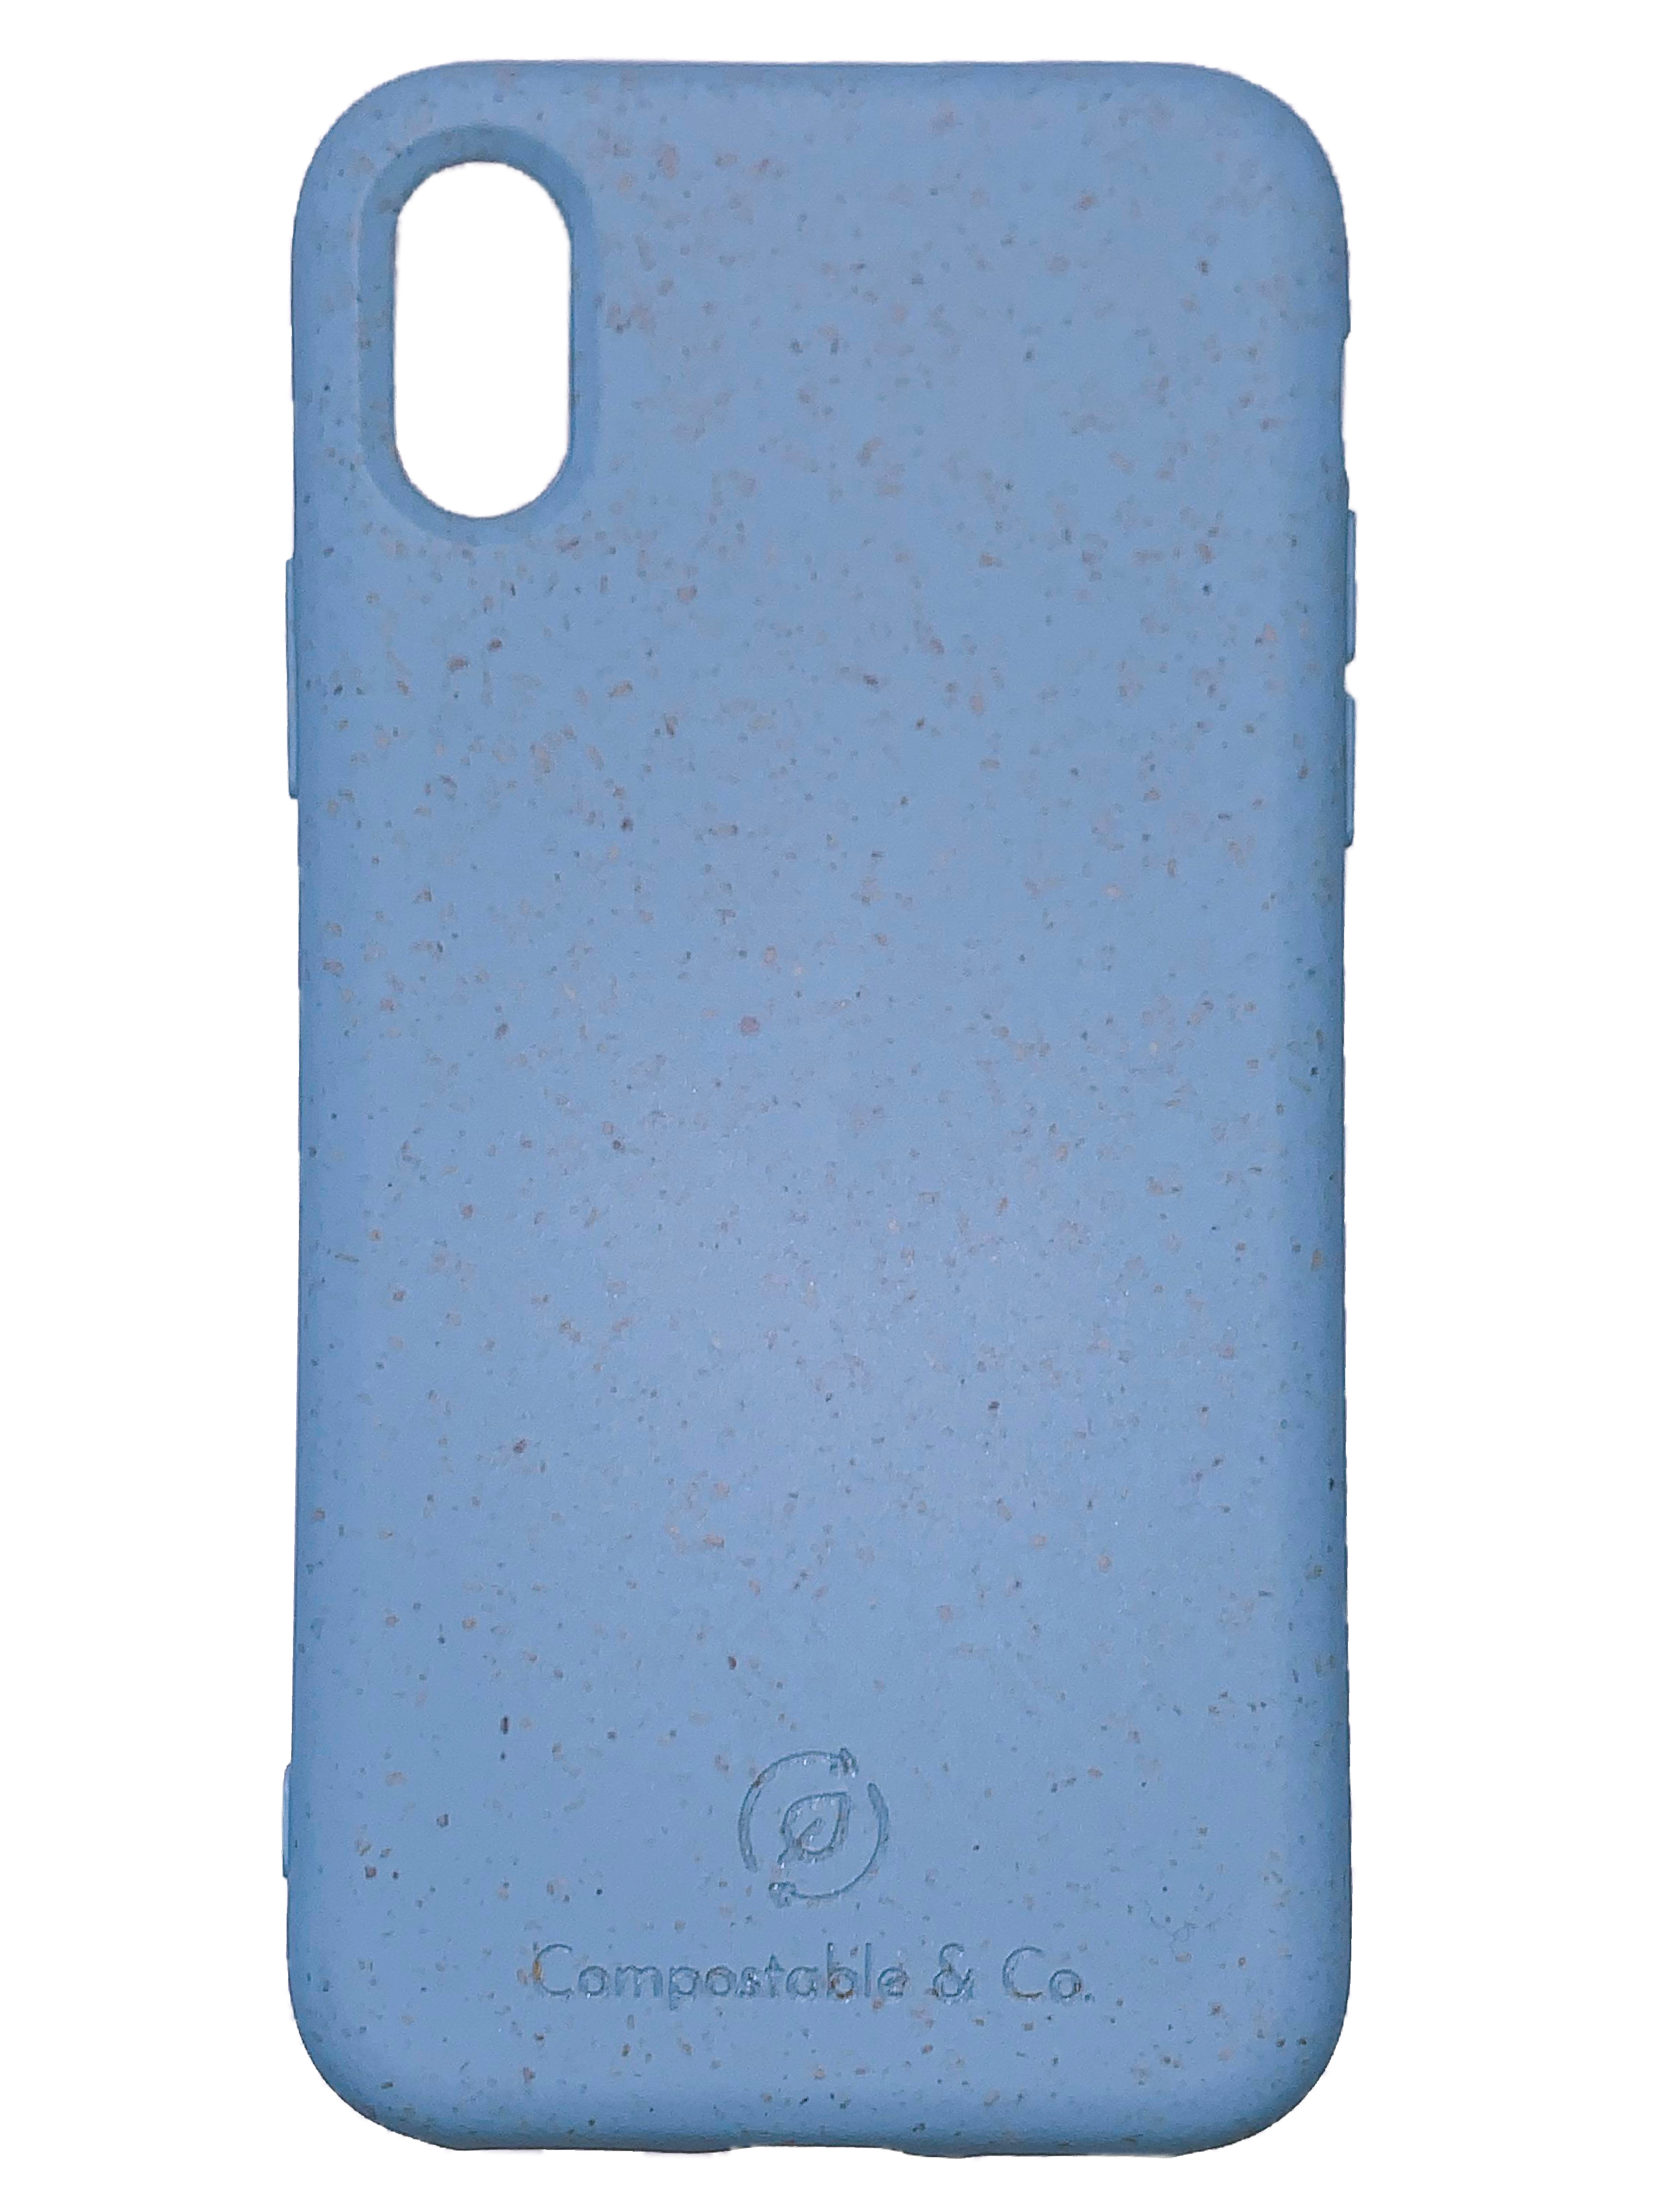 Compostable & Co. iPhone xr blue biodegradable phone case